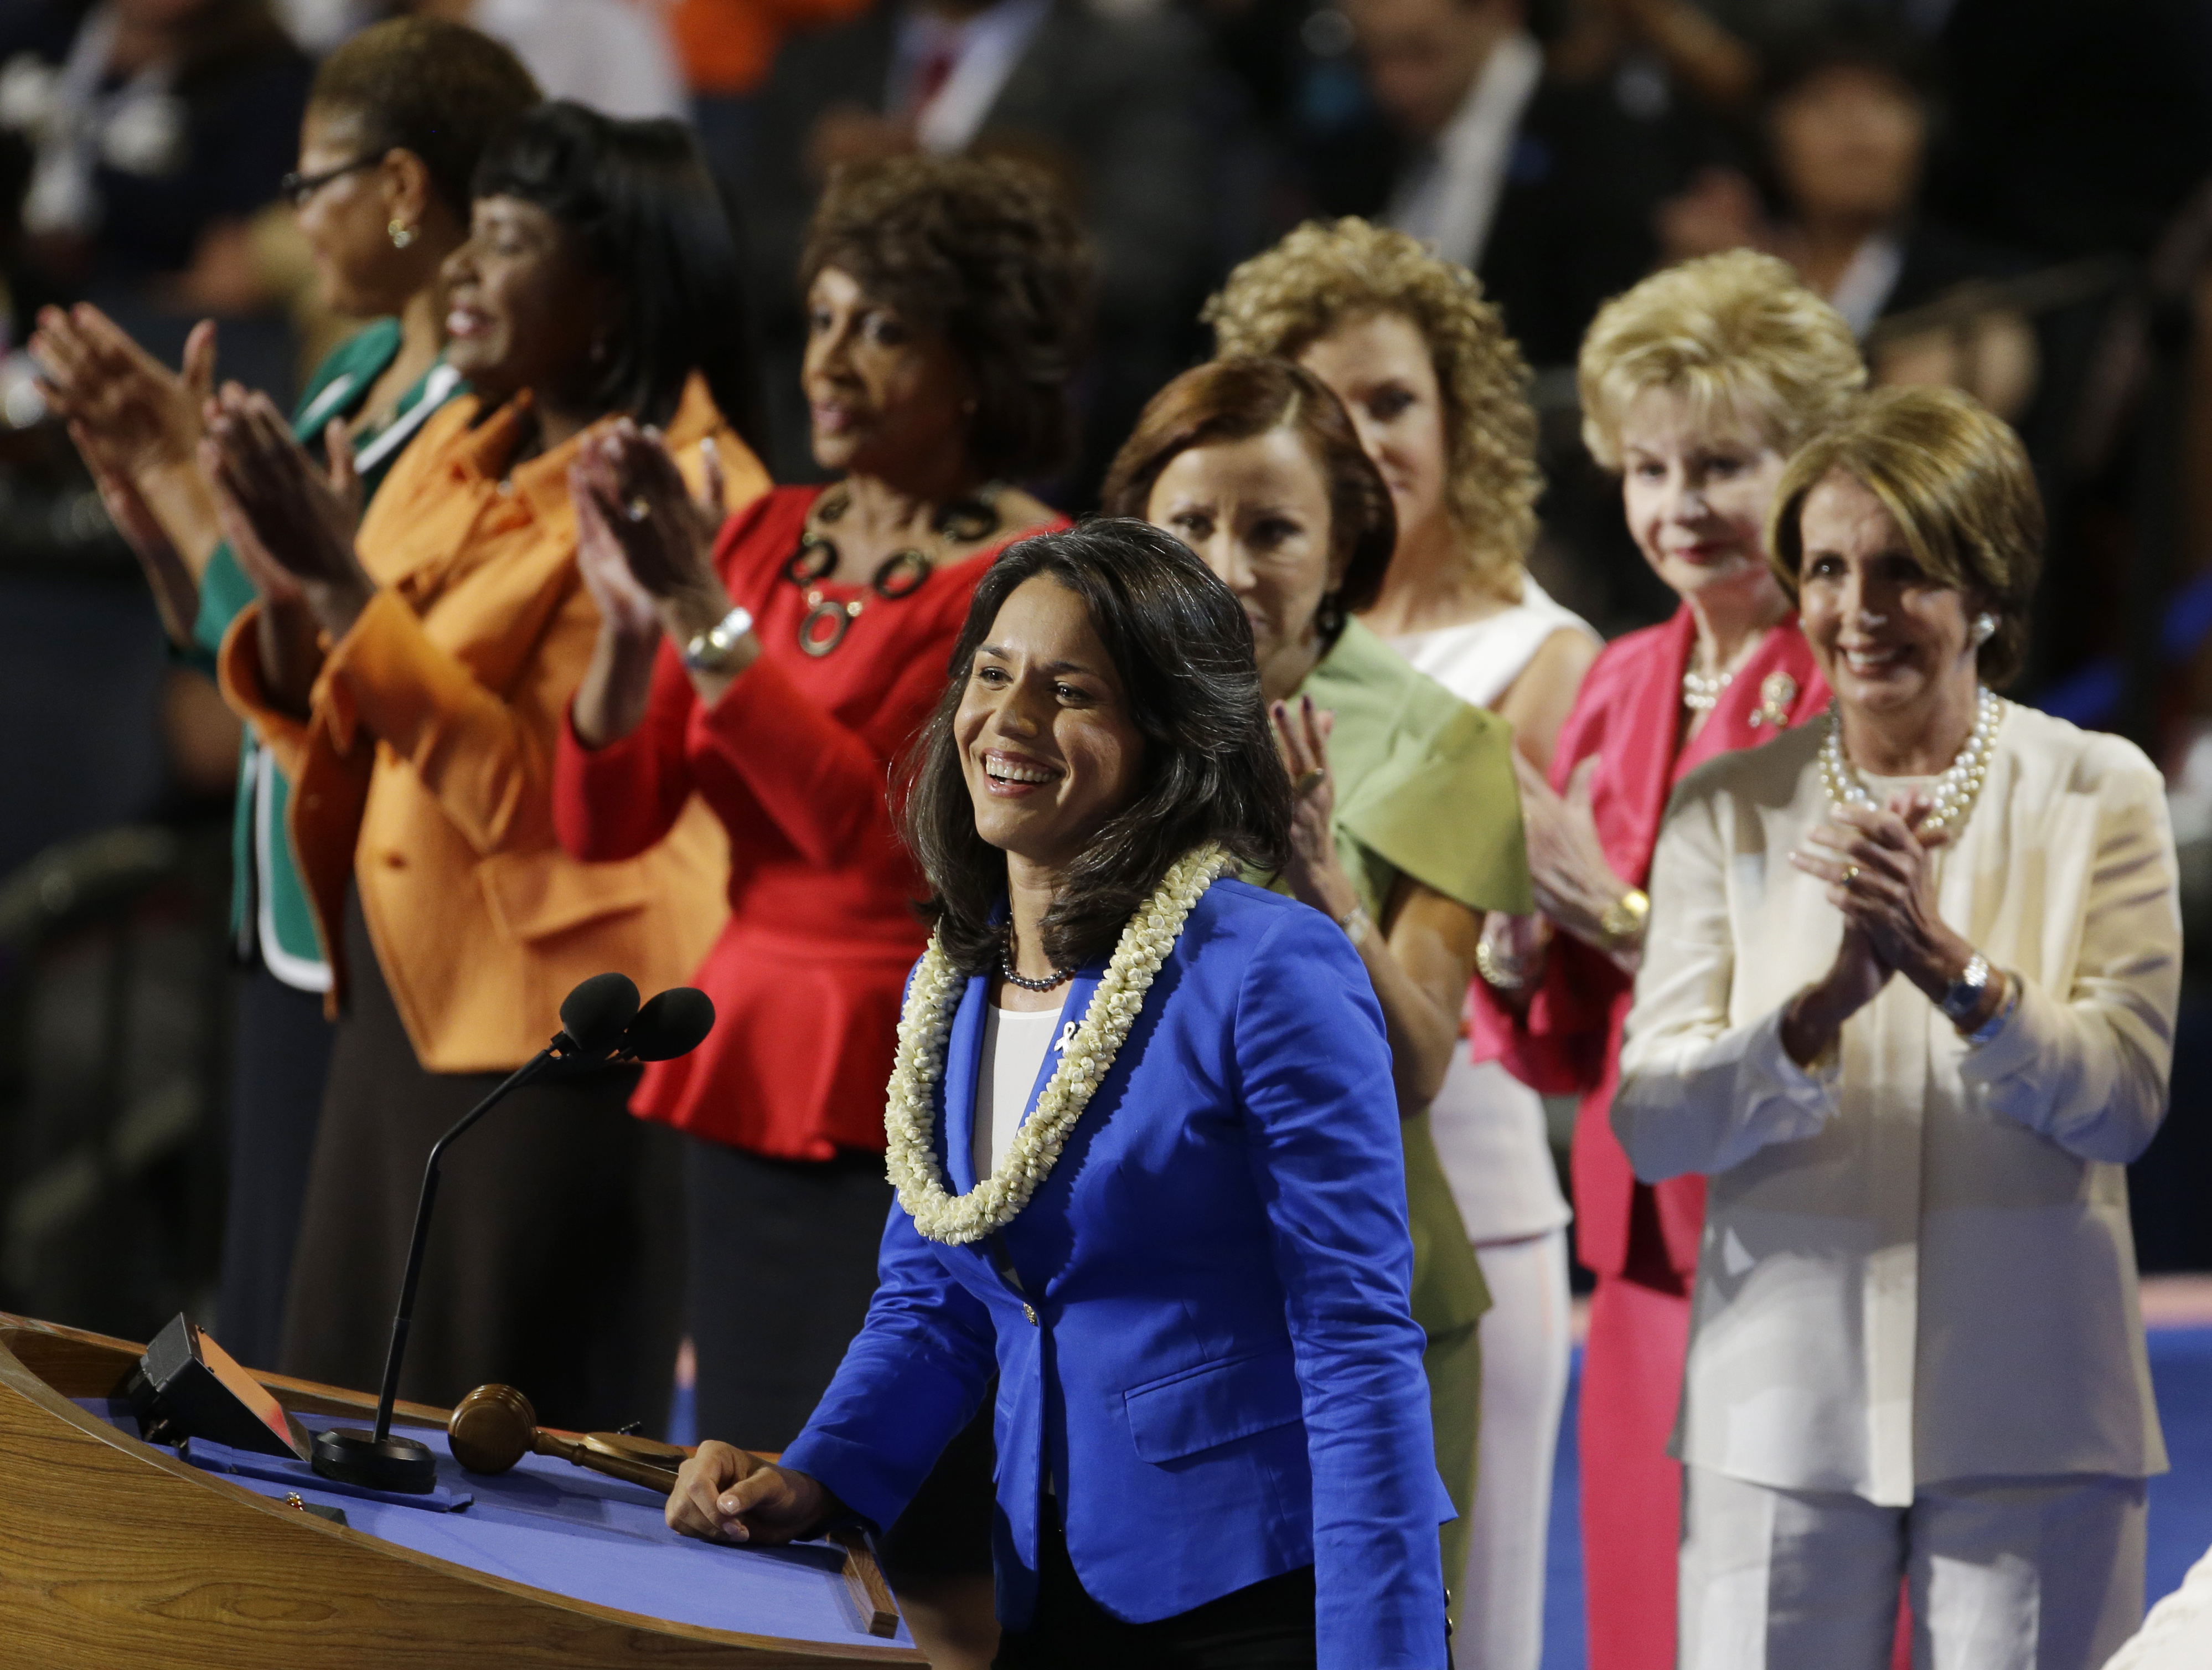 Hawaii House candidate Tulsi Gabbard is applauded by women House members at the 2012 Democratic National Convention in Charlotte, N.C. (Lynne Sladky—AP)